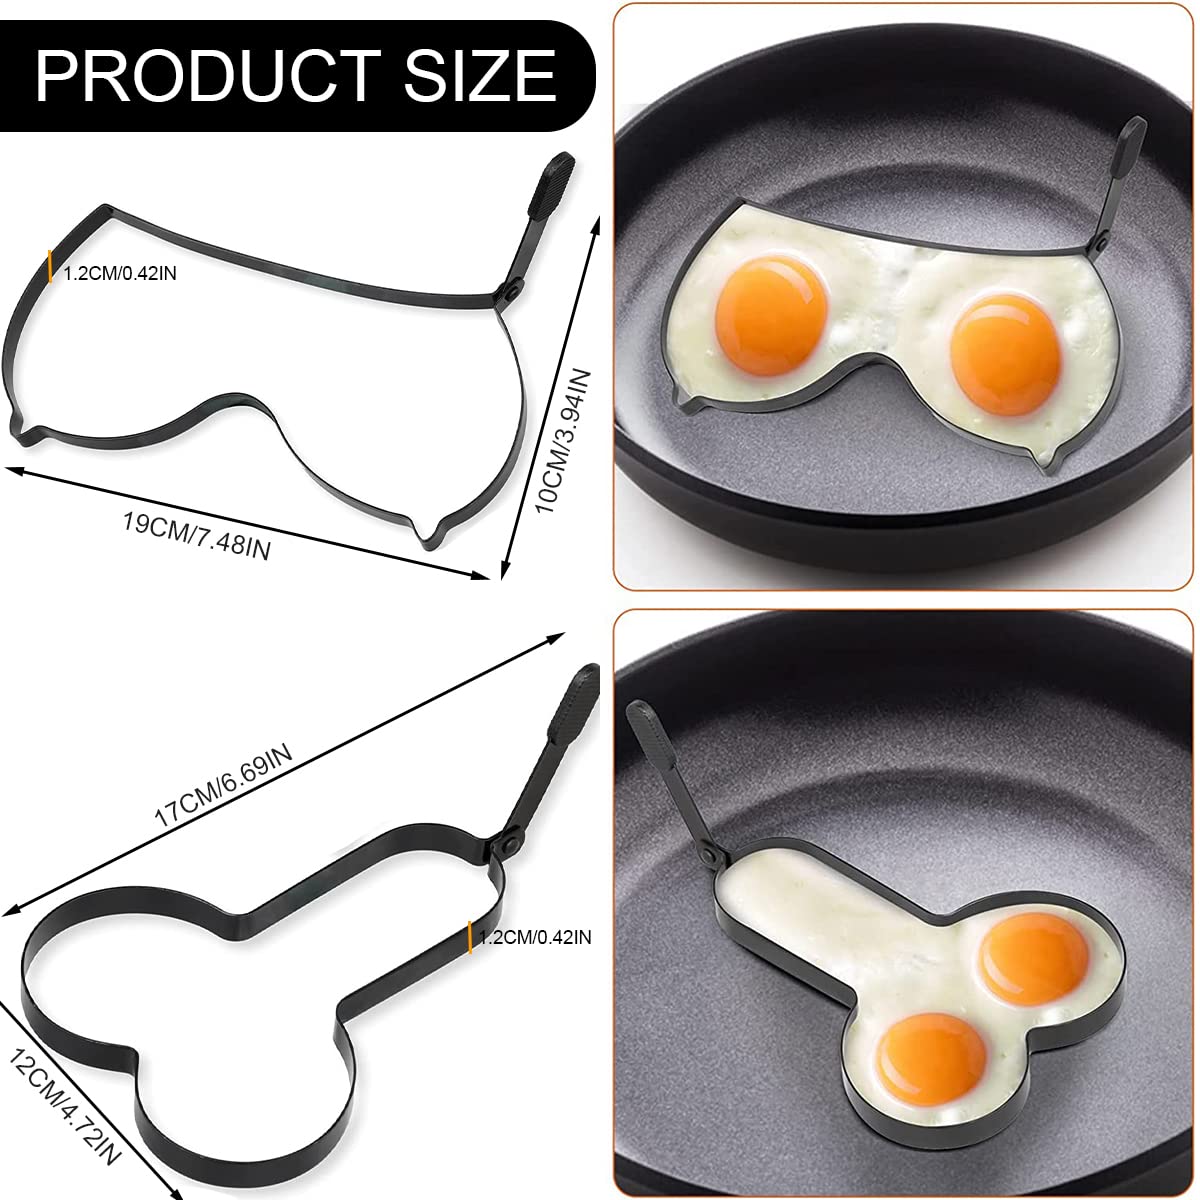 GUAGLL 2PCS Funny Egg Pancake Cooking Tool，Stainless Steel DIY Kitchen Egg Fried Mould with Handle (Shape A+B)